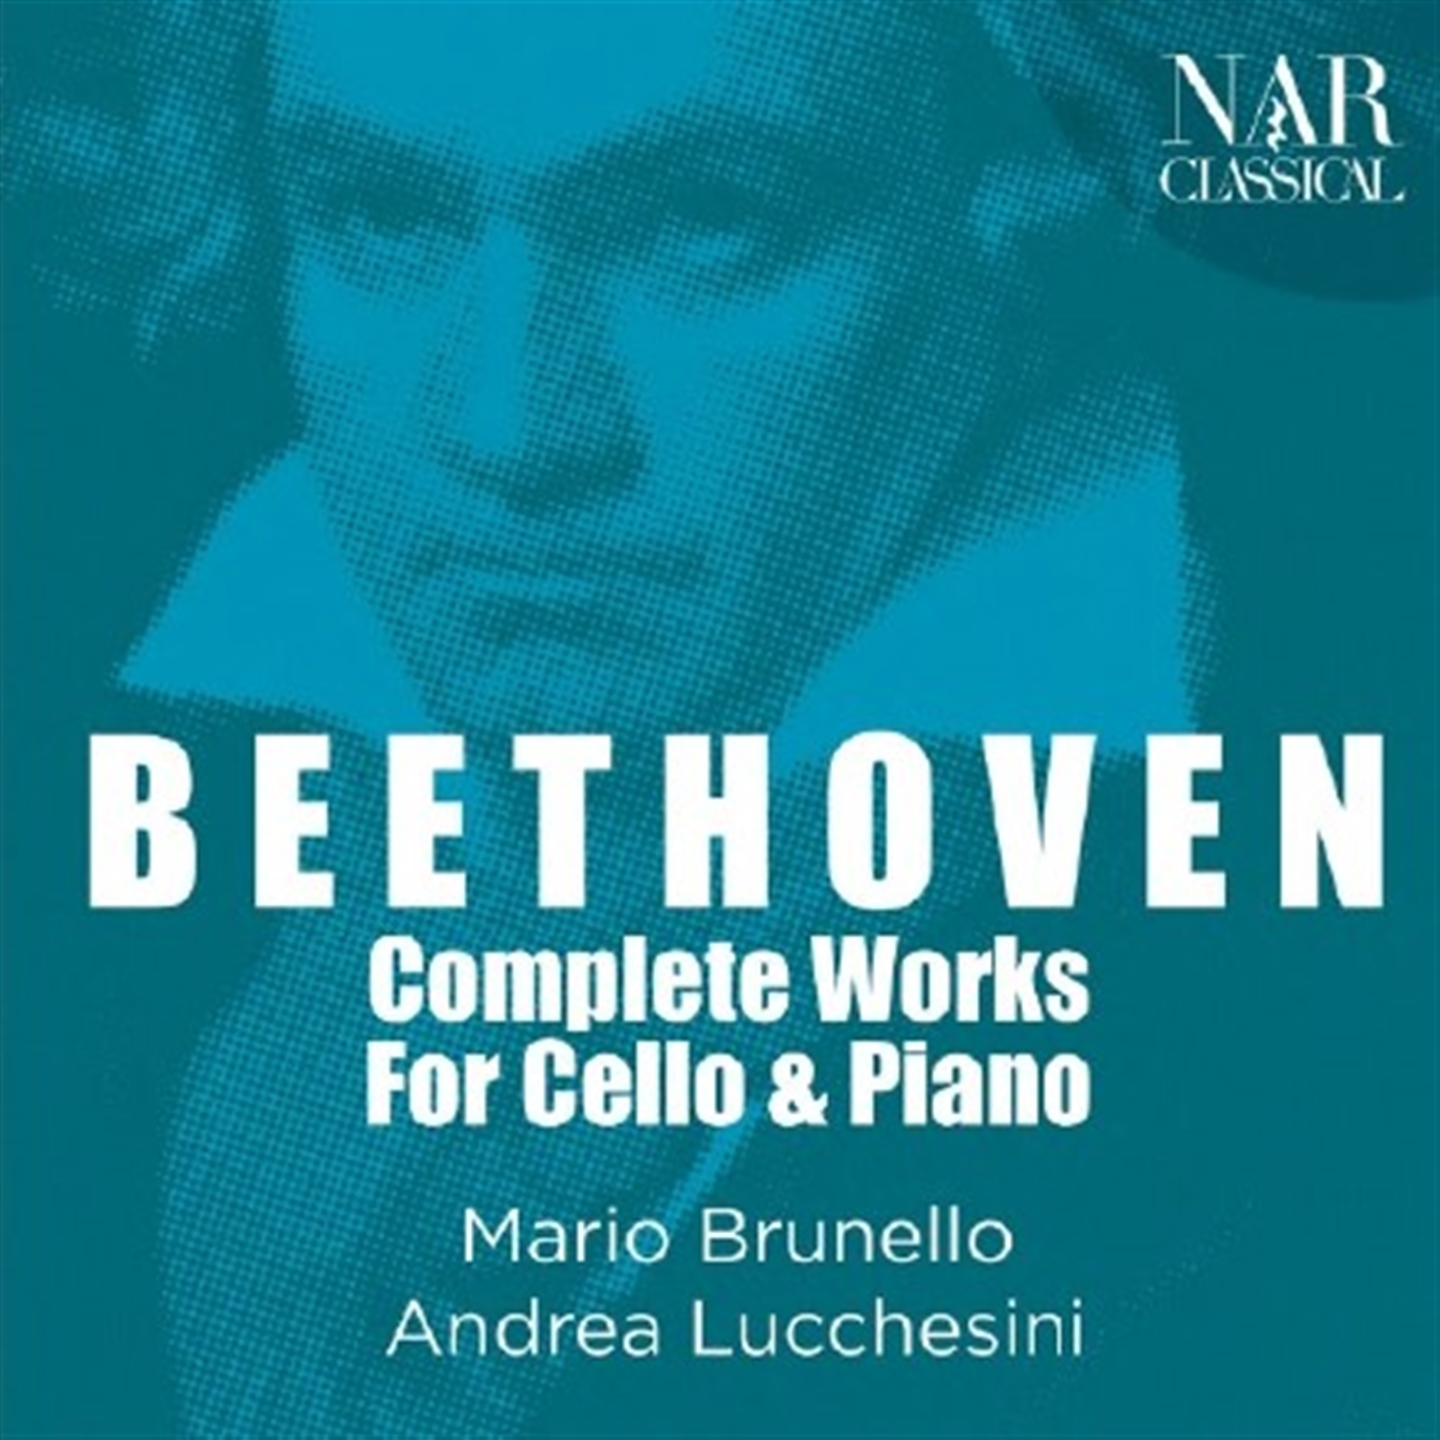 COMPLETE WORKS FOR CELLO AND PIANO